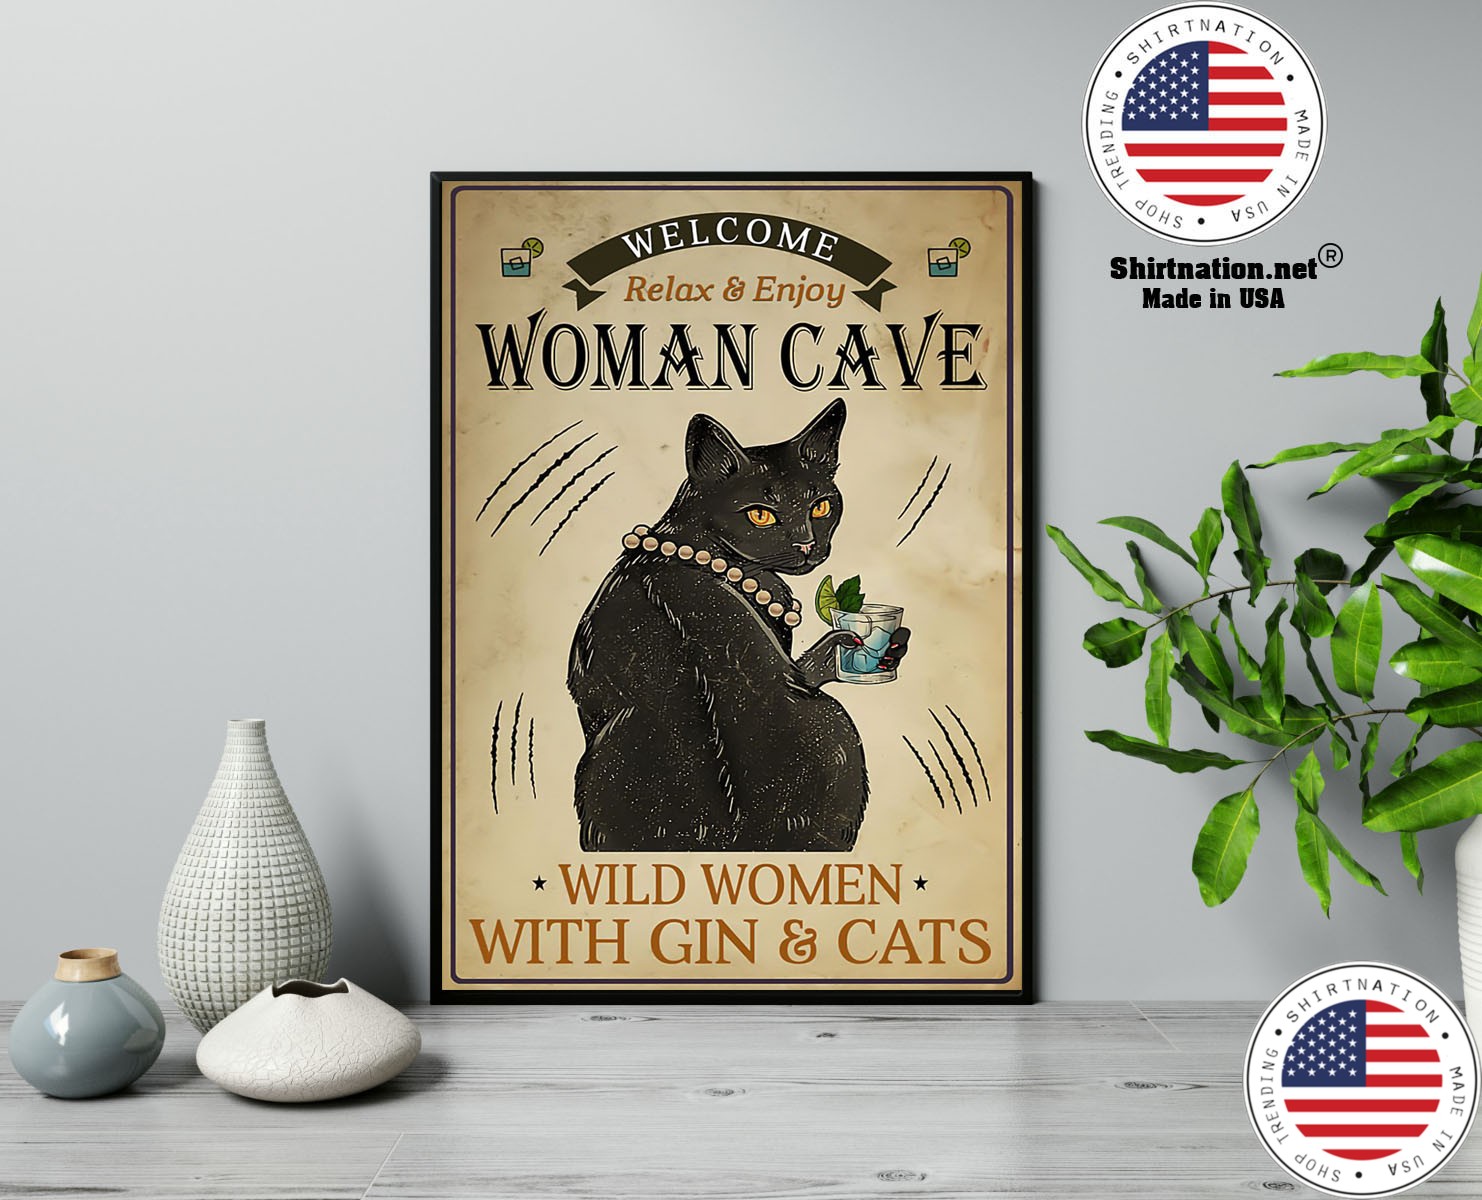 Welcome relax enjoy woman cave will women with gin and cats poster 13